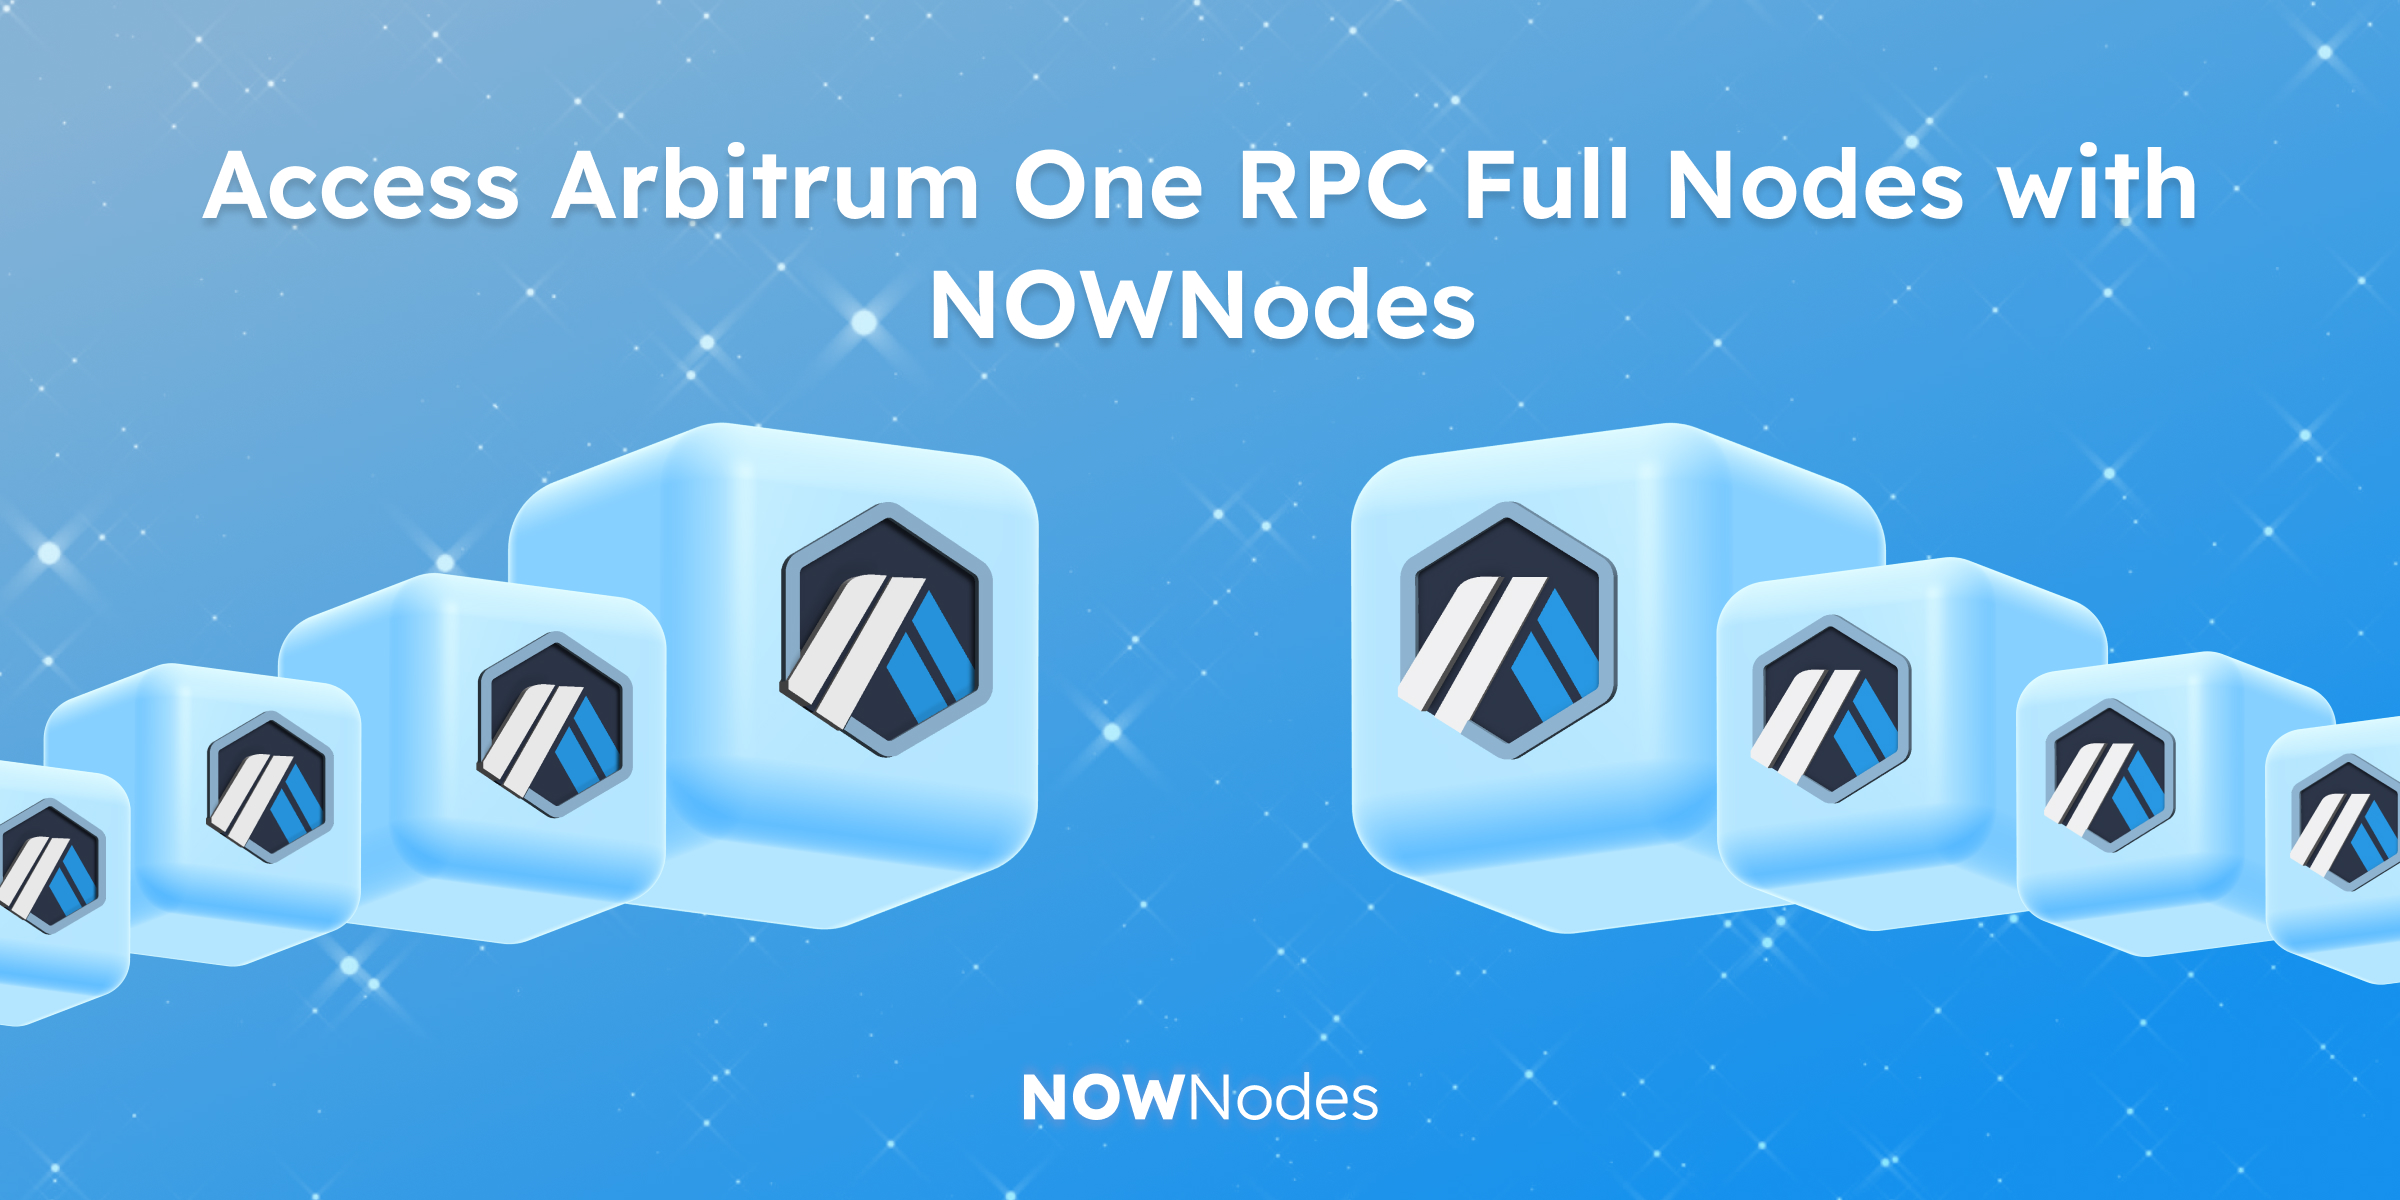 Access Arbitrum One RPC Full Nodes with NOWNodes